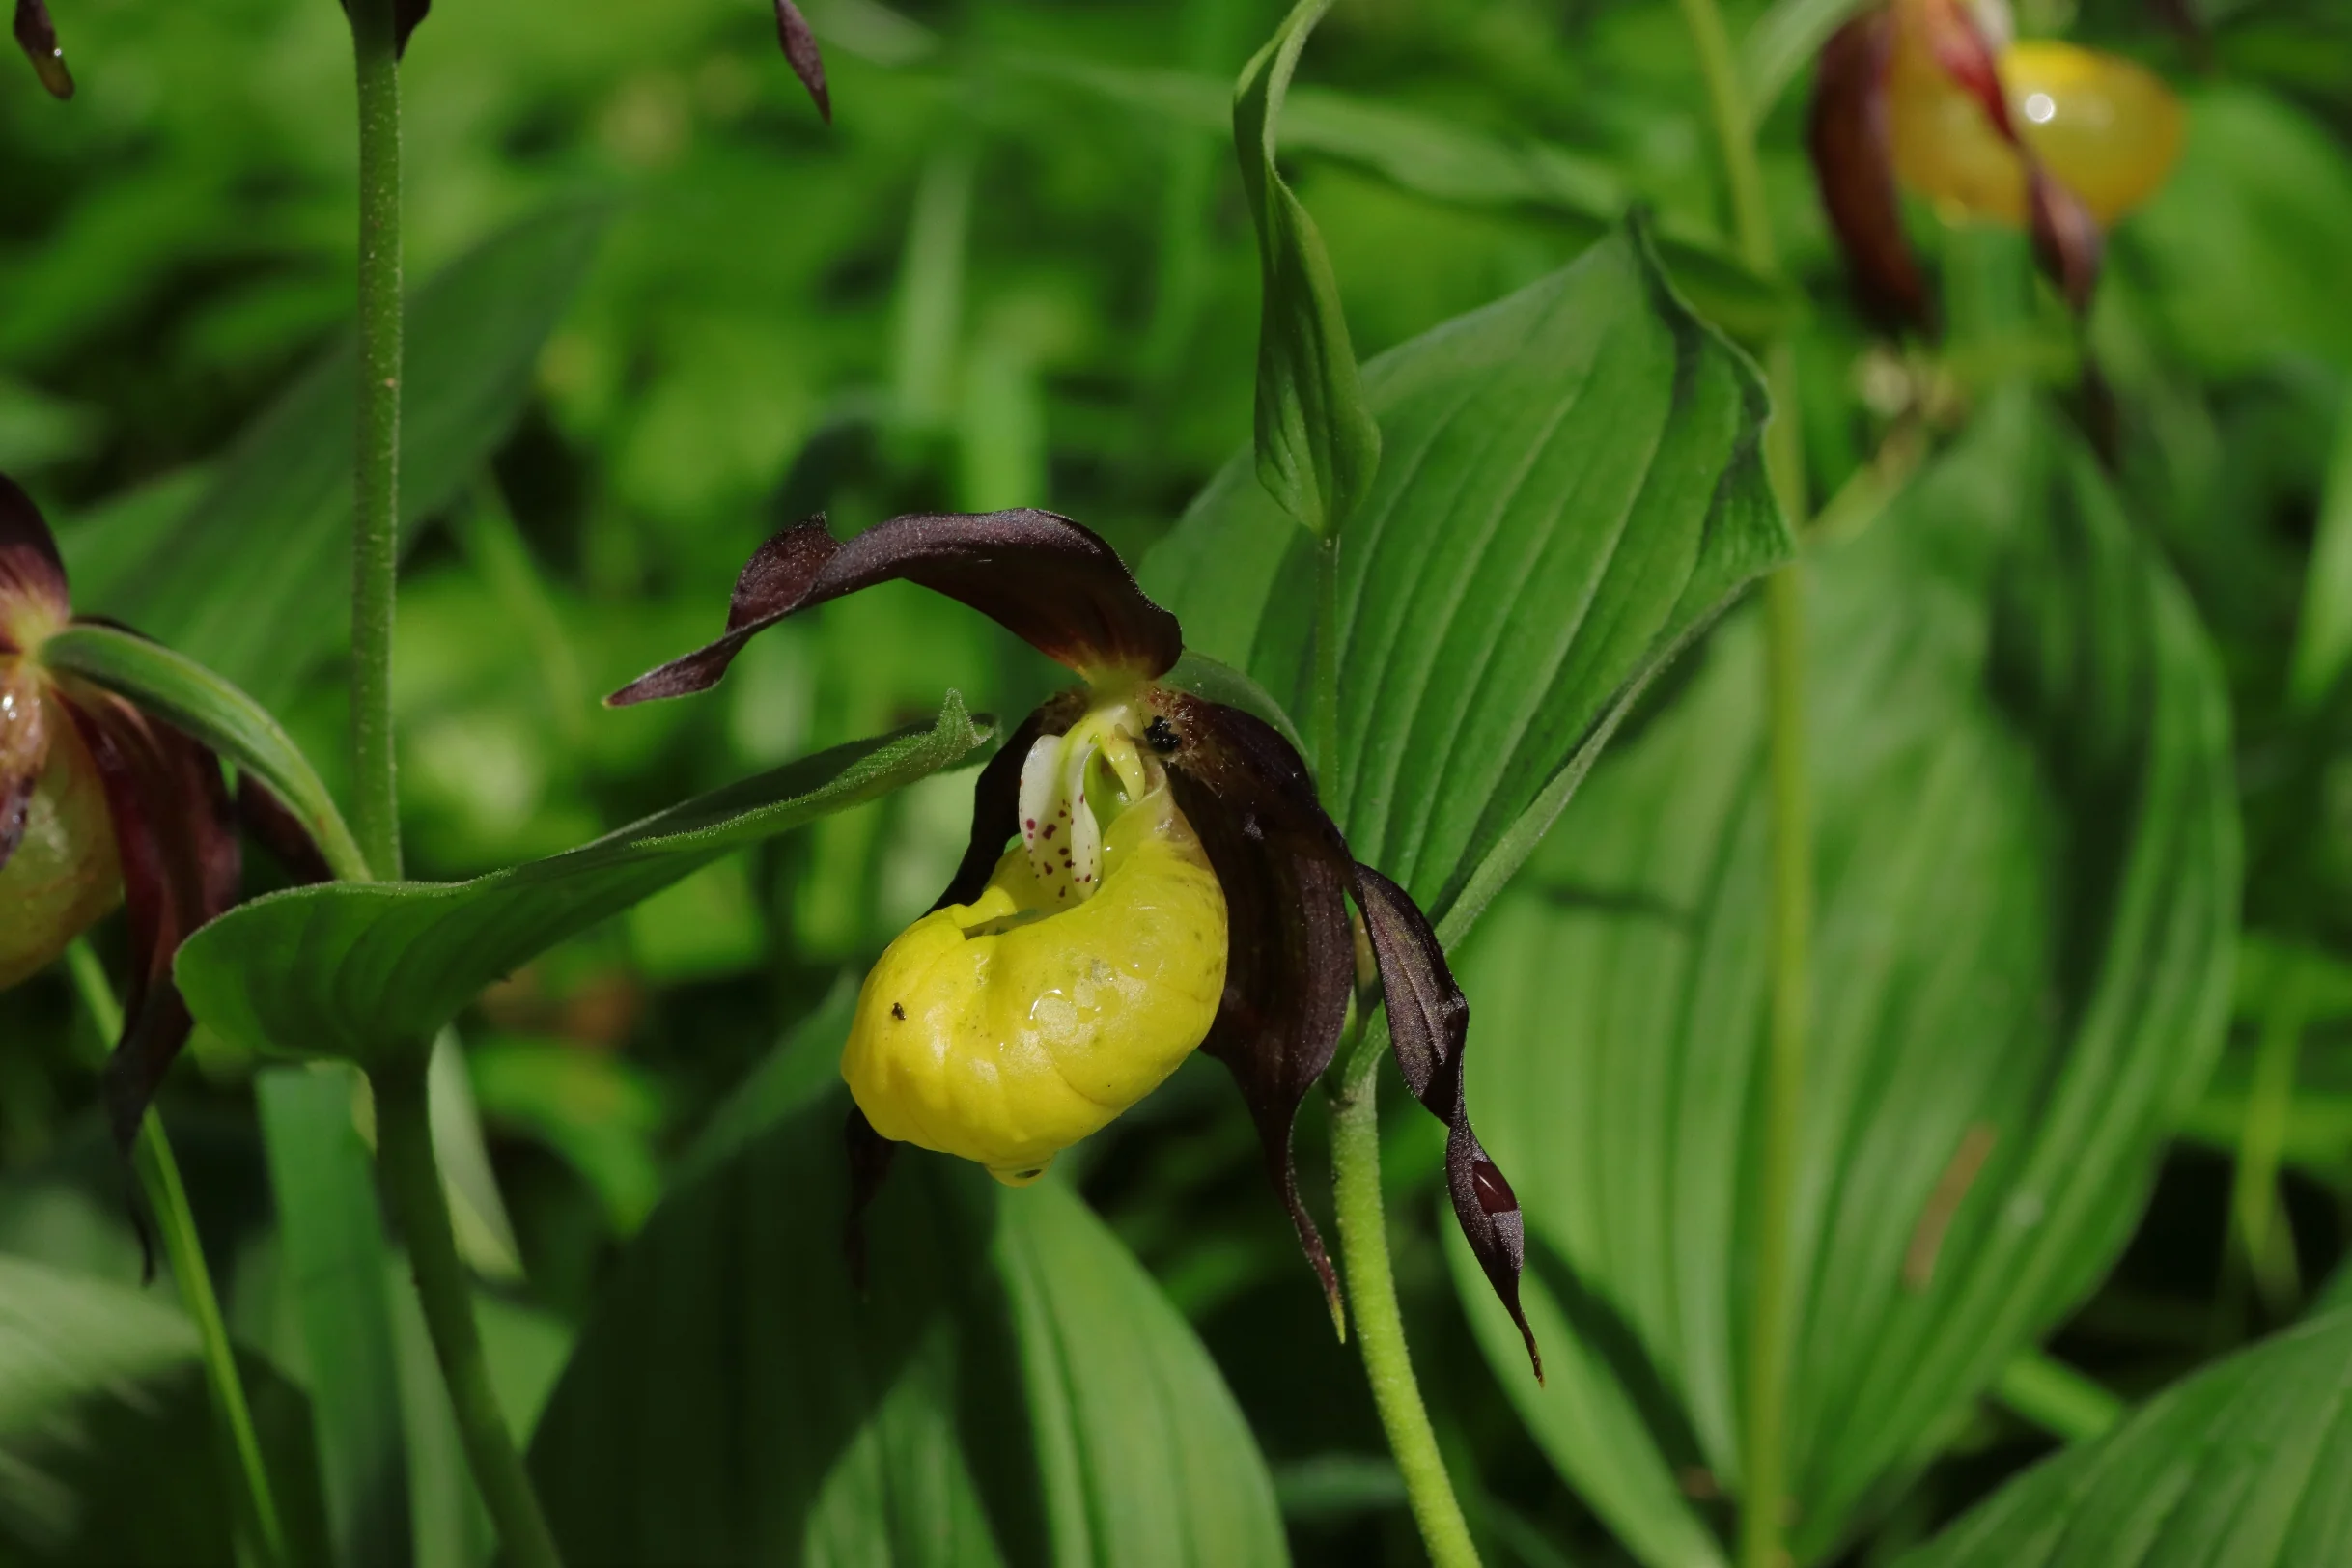 A group of the lady's-slipper orchid